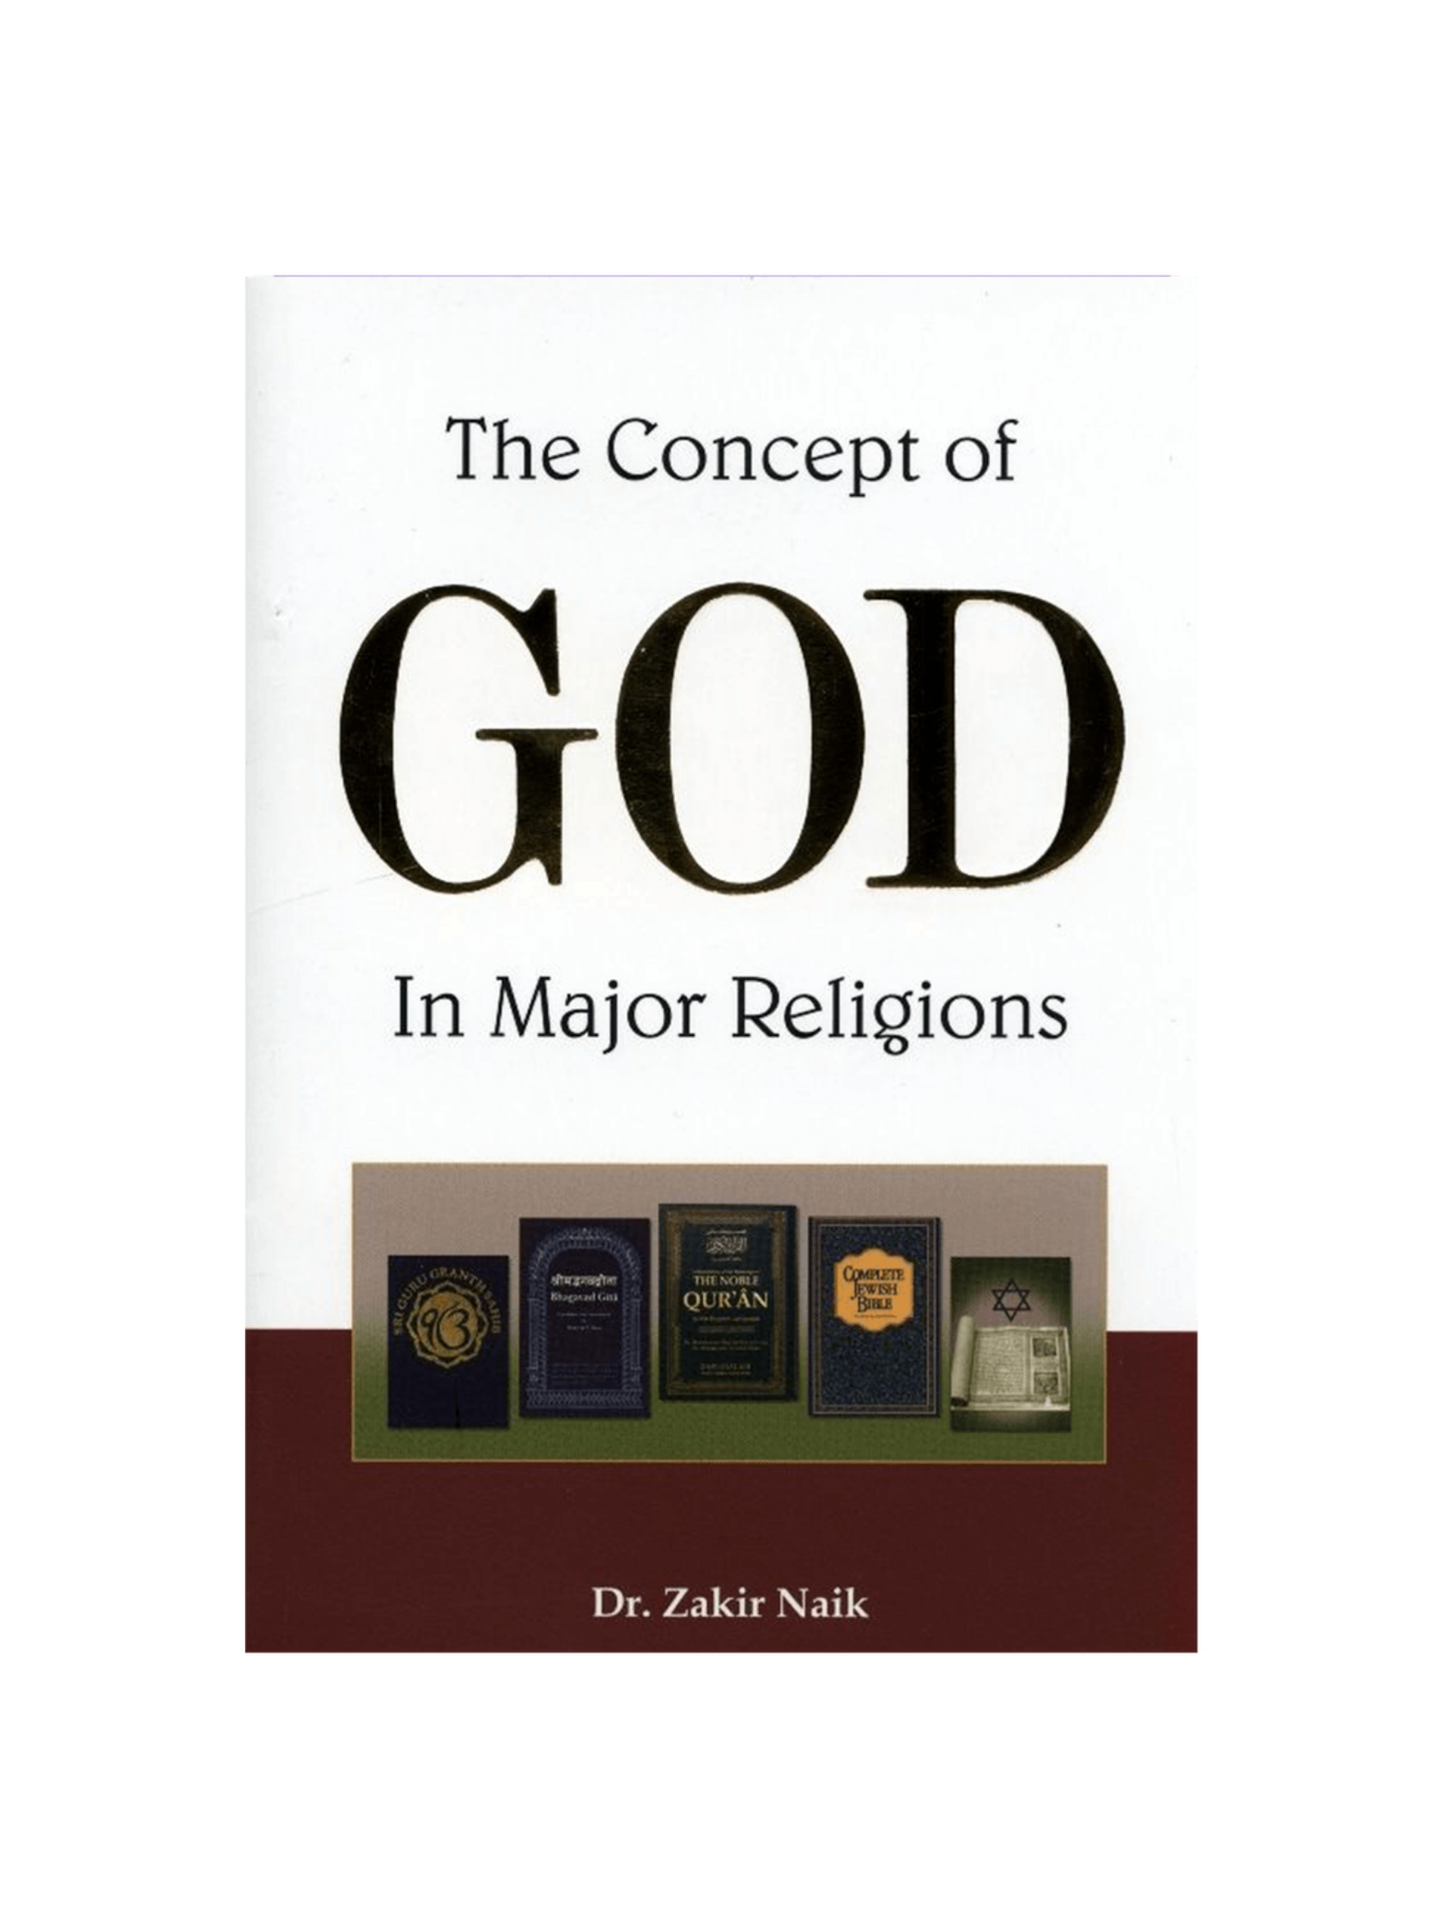 The Concept of GOD in Major Religions